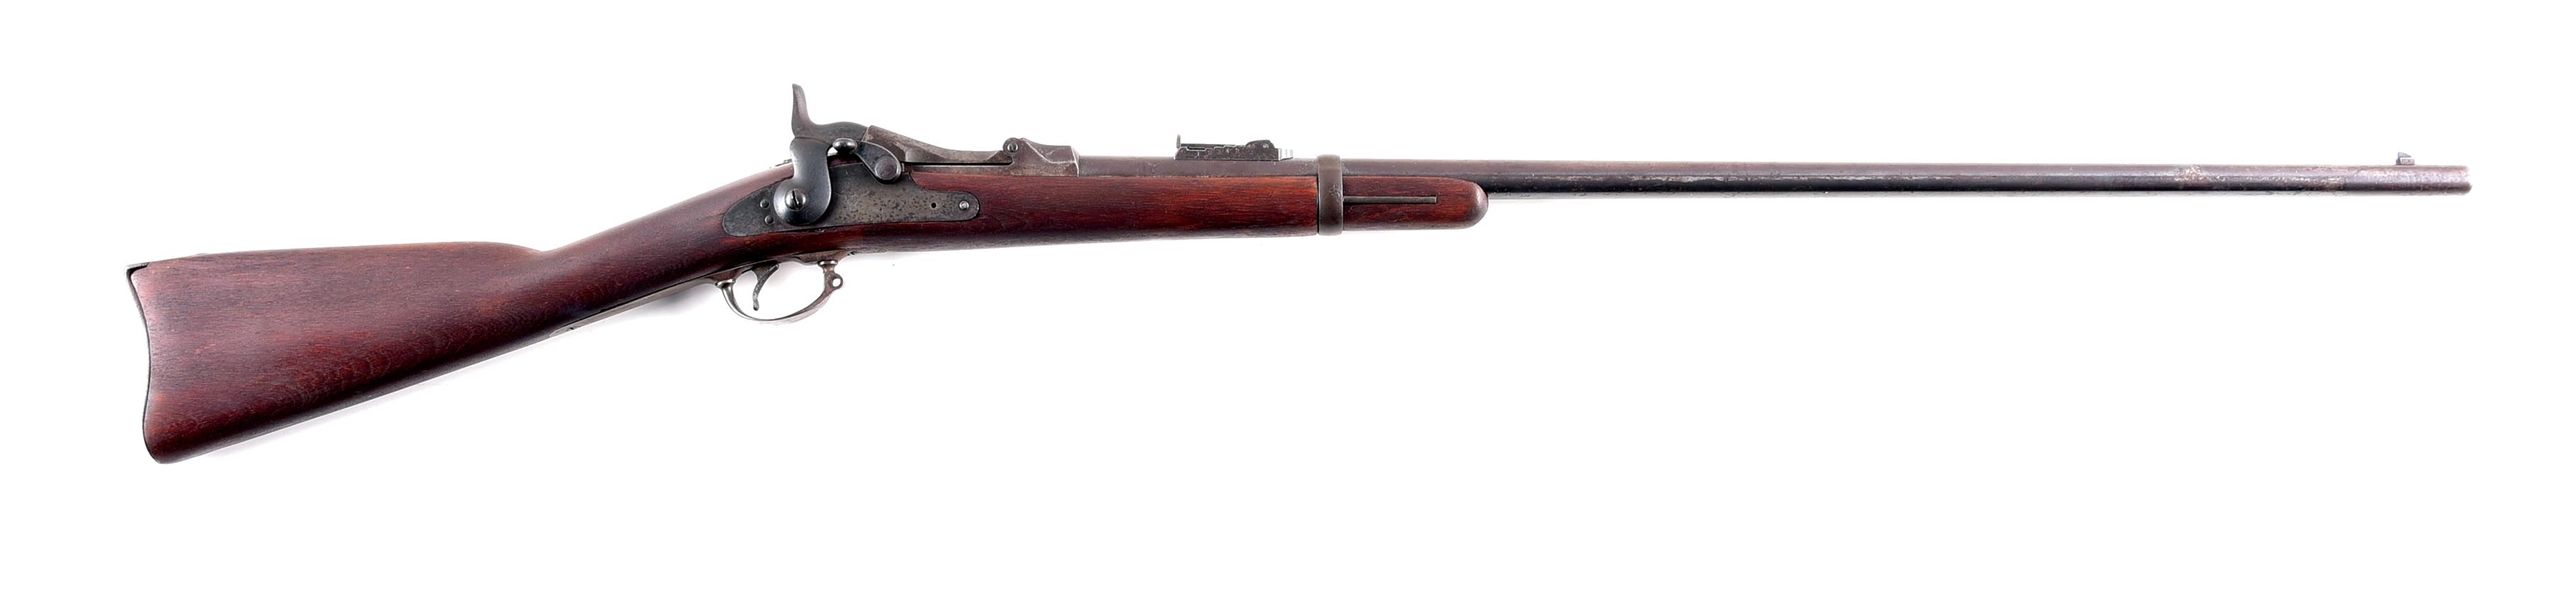 (A) MODIFIED SPRINGFIELD MODEL 1873 TRAPDOOR RIFLE.